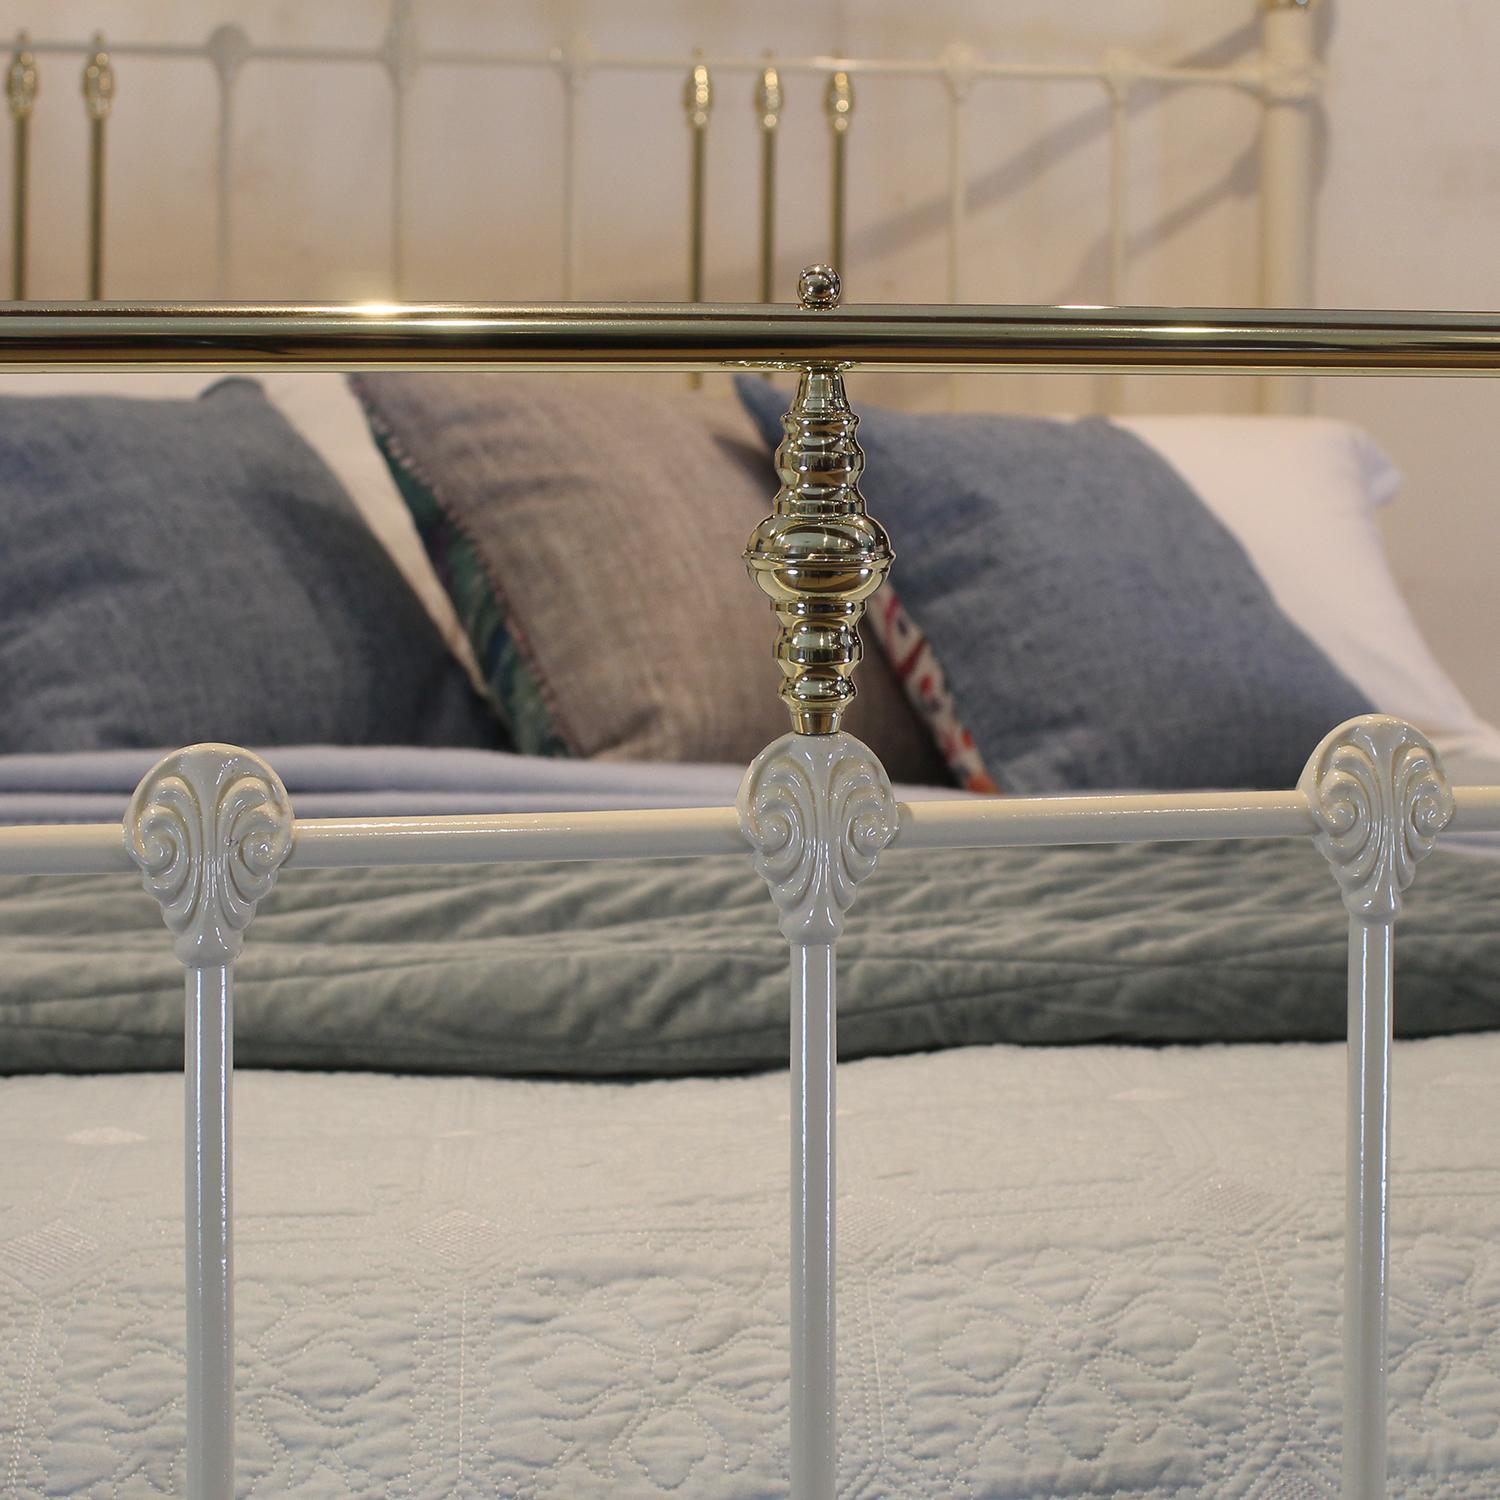 Late 19th Century Wide Antique Bed in Cream MSK77